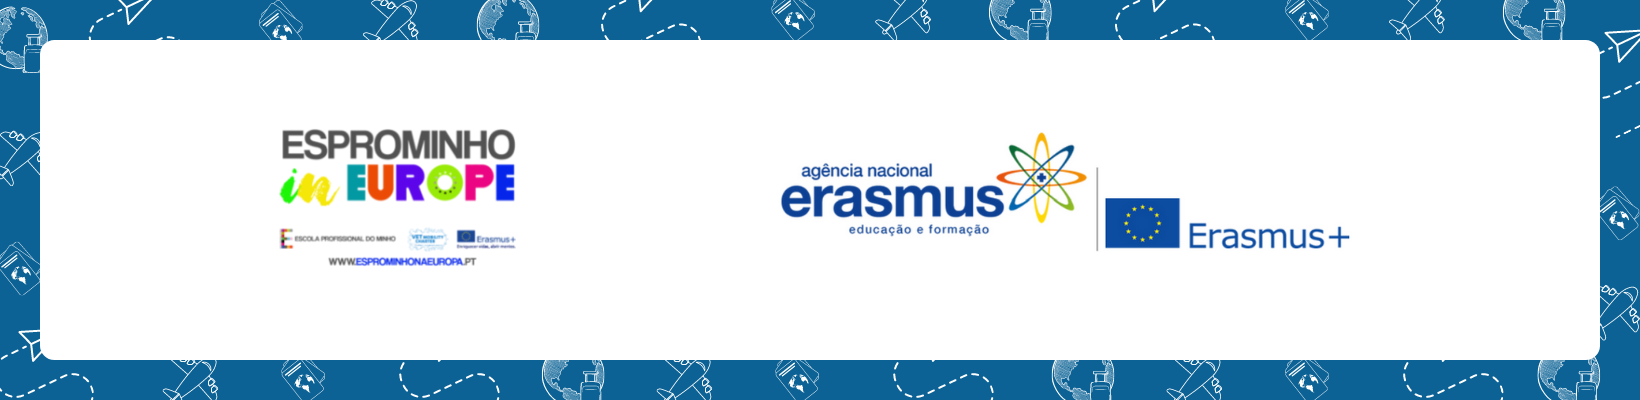 Erasmus accredited school in adult education, vocational education and training (VET) - Esprominho na Europa